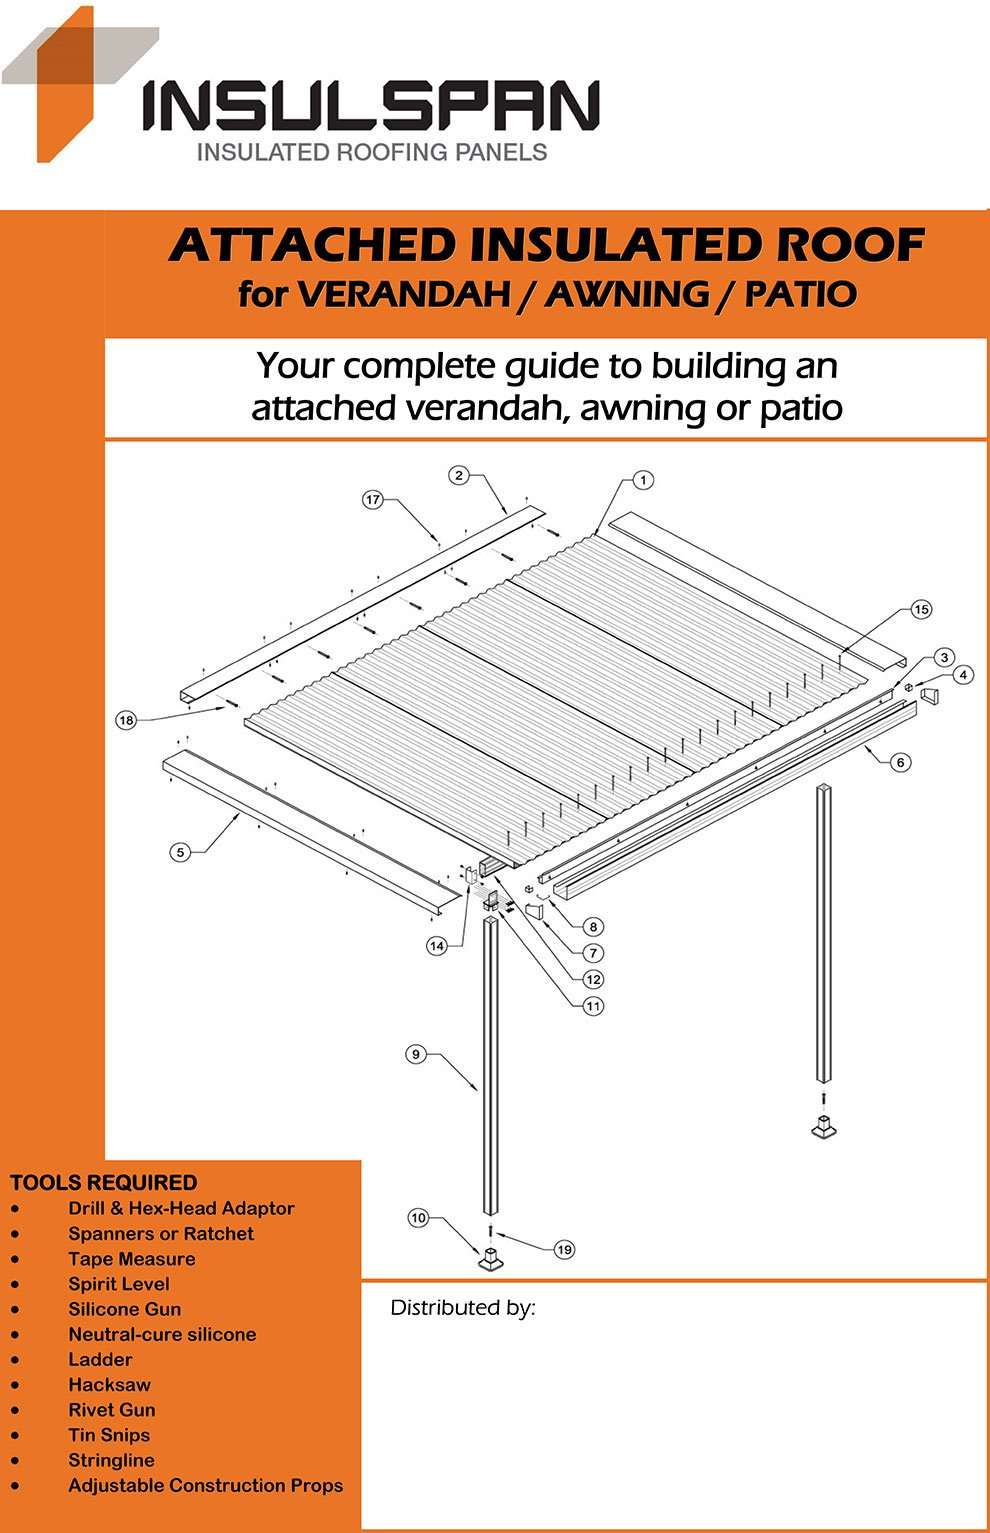 Insulated Patio Panels Roof Kits, Insulspan Metal Roofing